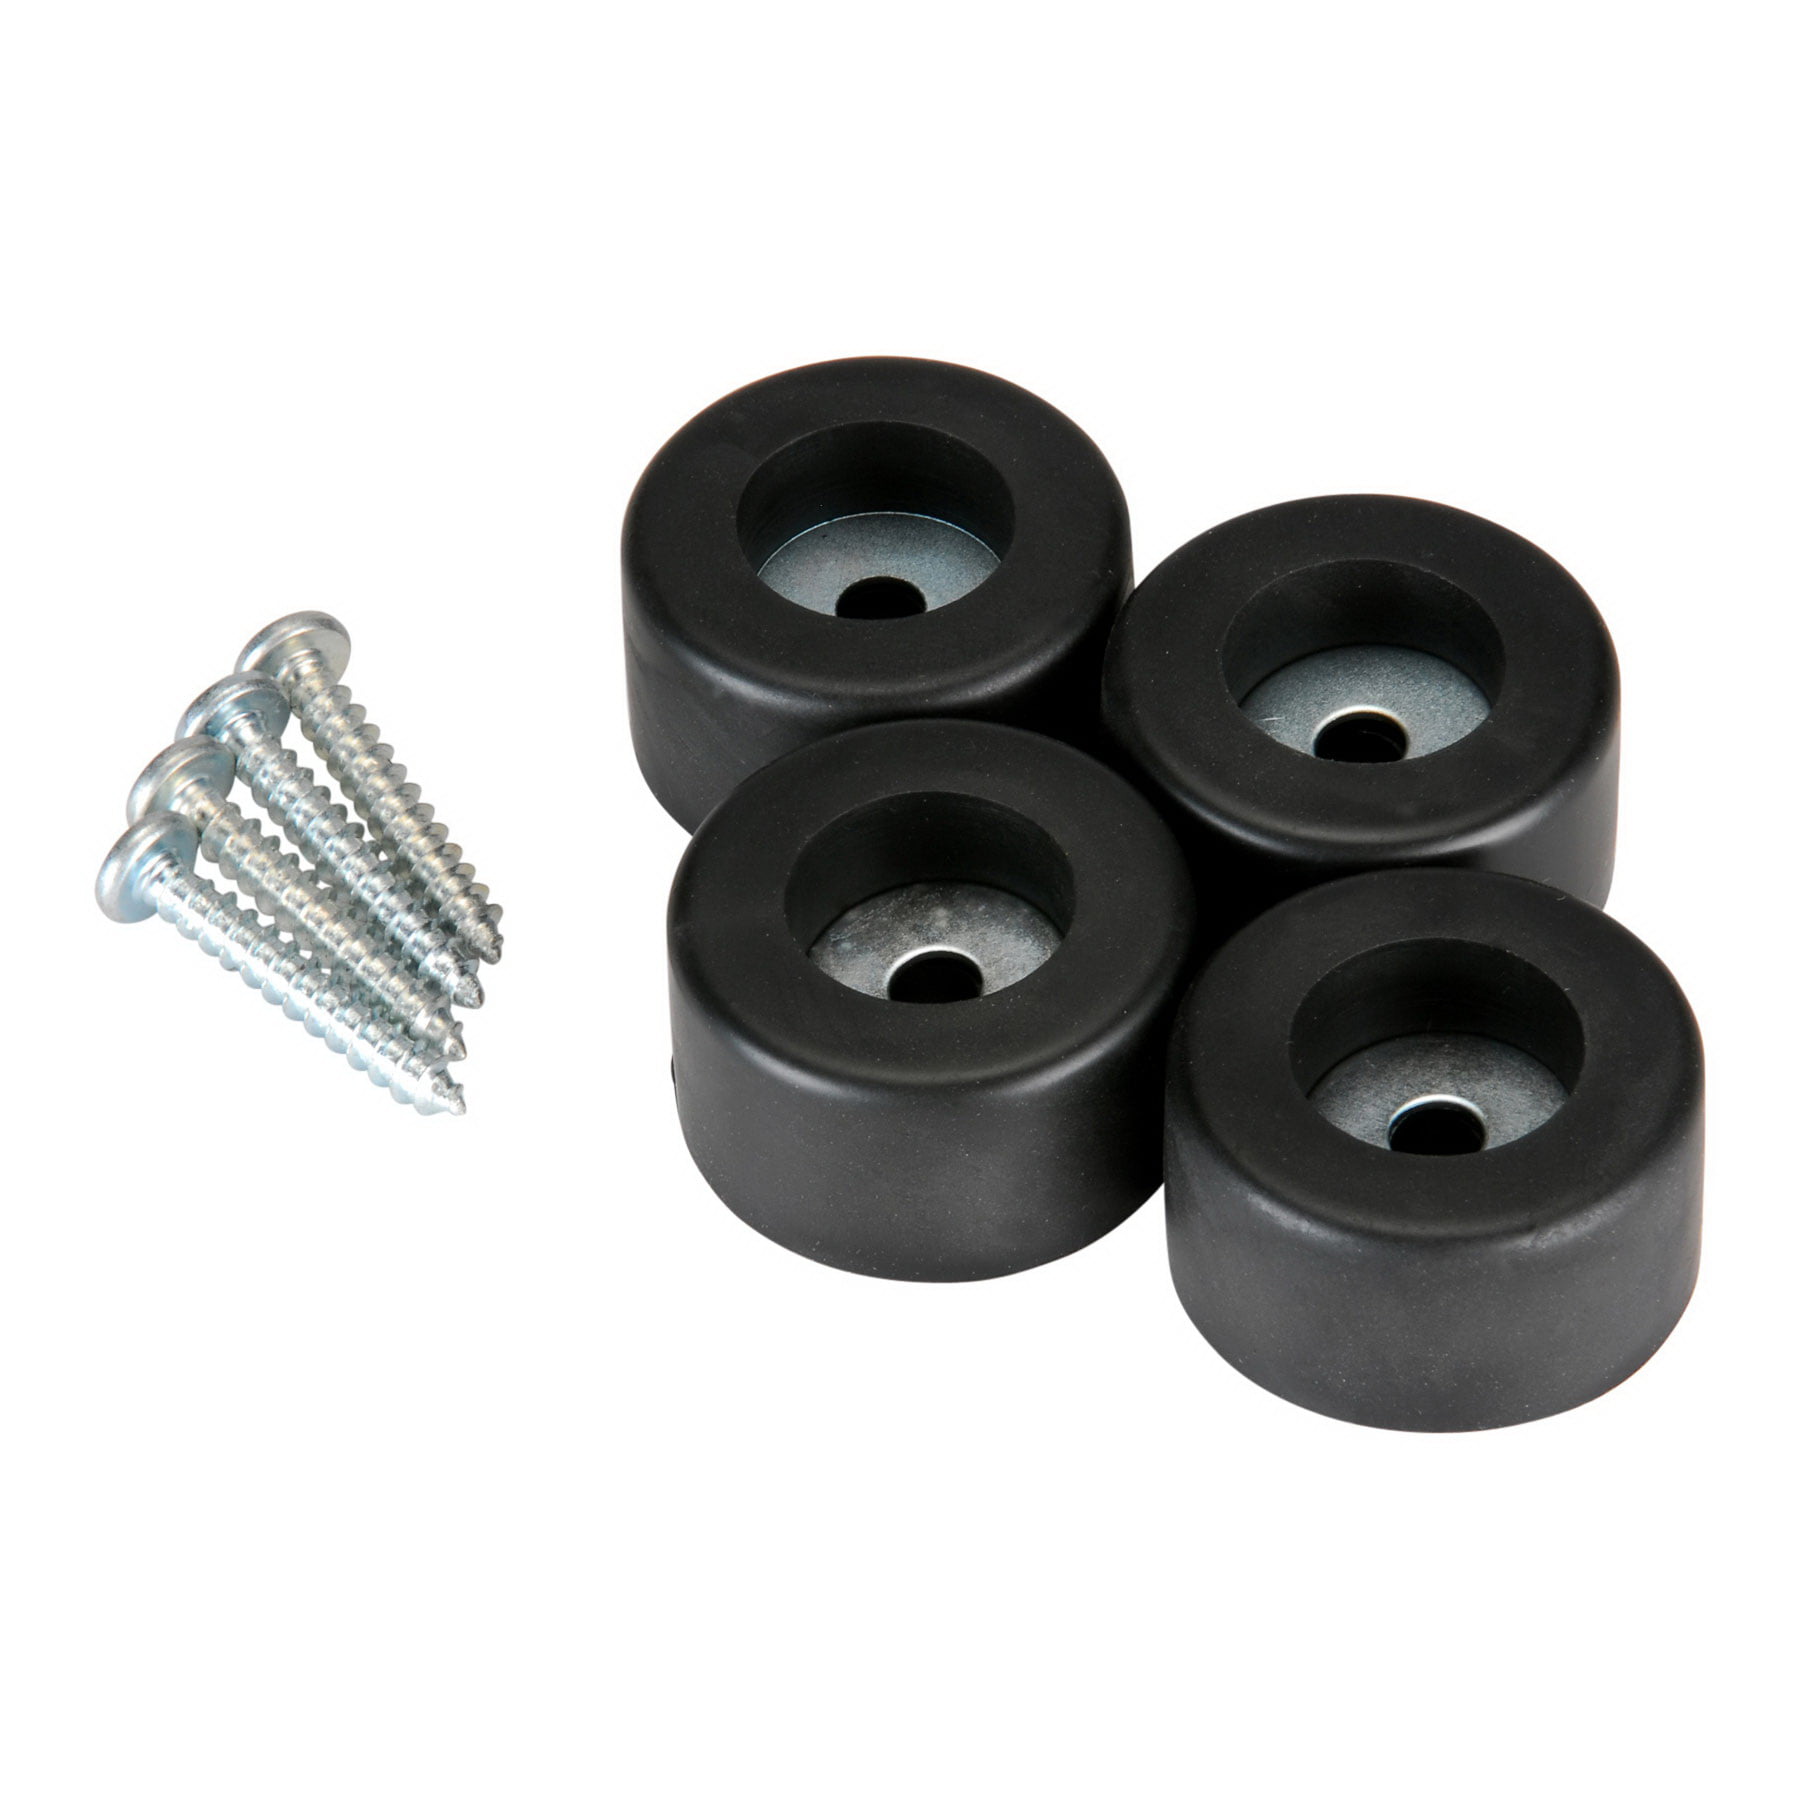 24 Tapered Hard Rubber Bumpers w Washer Rubber Feet 3/4" Diameter 